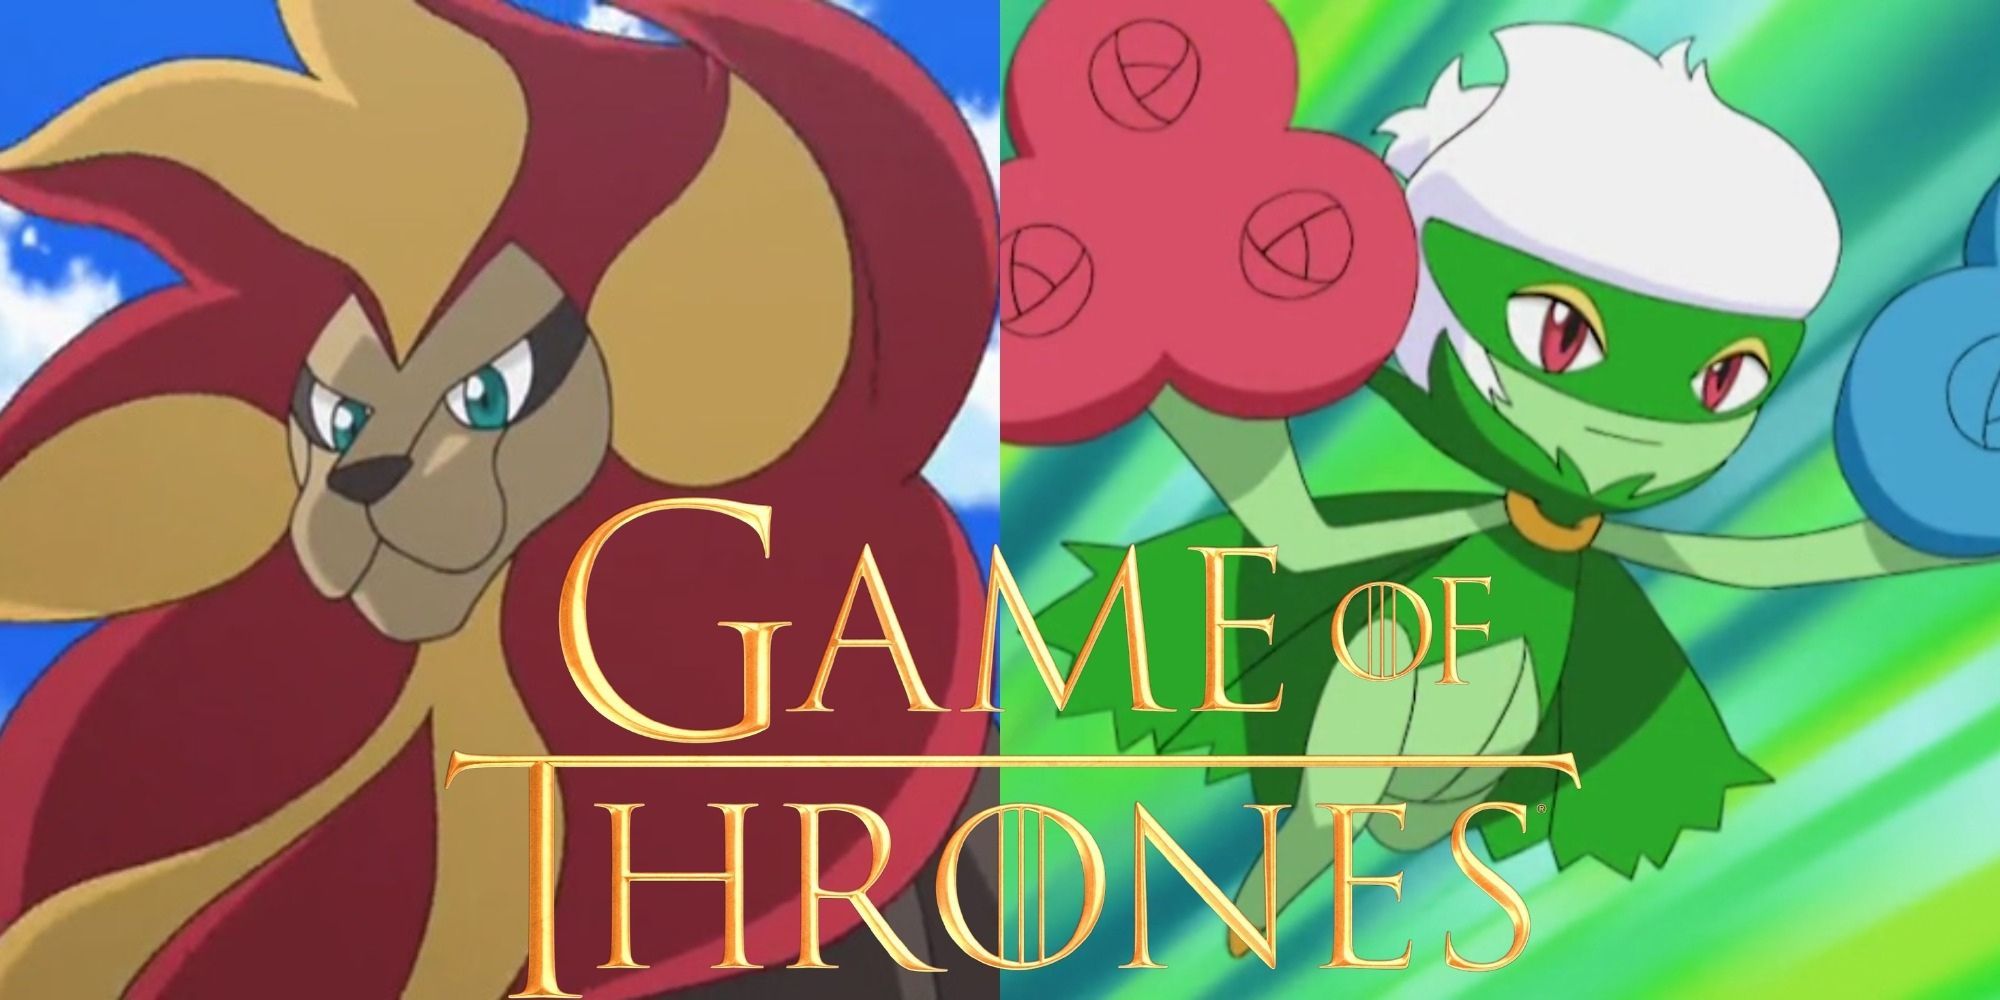 Split image of Pyroar and Roserade Pokemon with the Game of Thrones logo overlaid